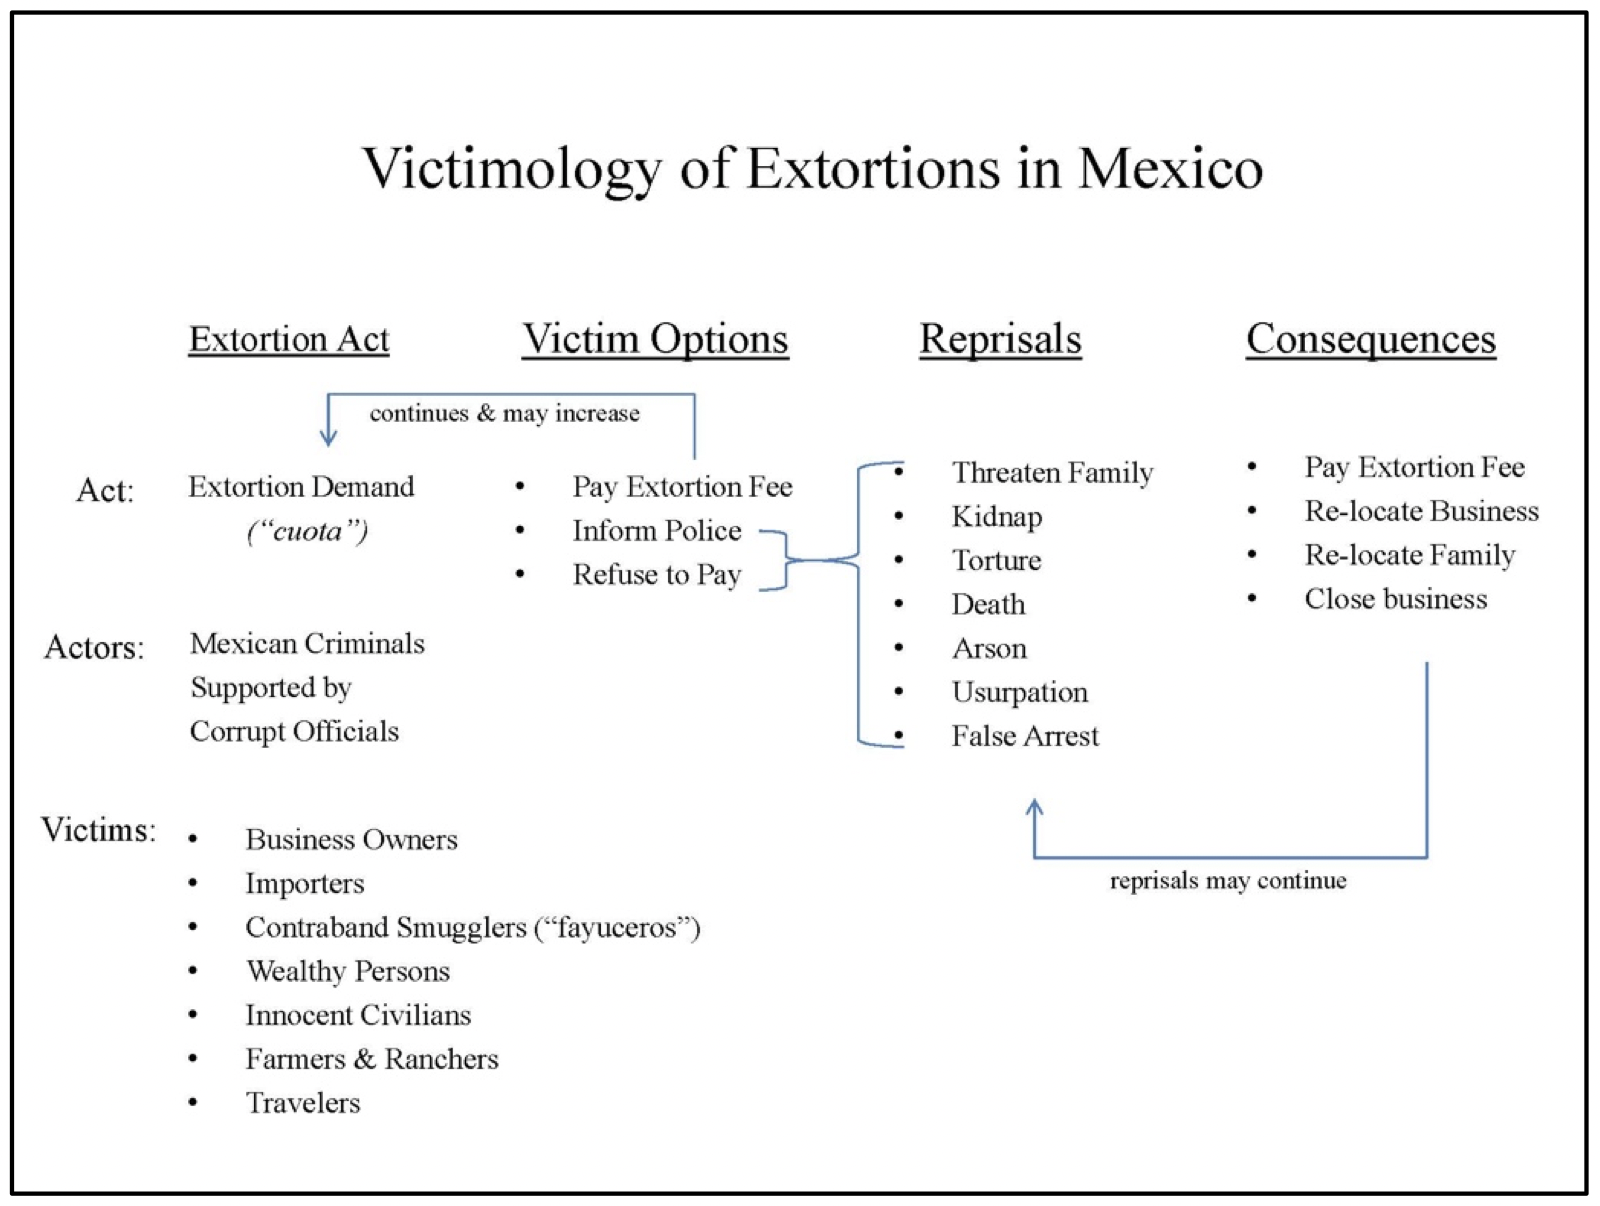 This flowchart shows relationships related to victimology of extortions in Mexico.